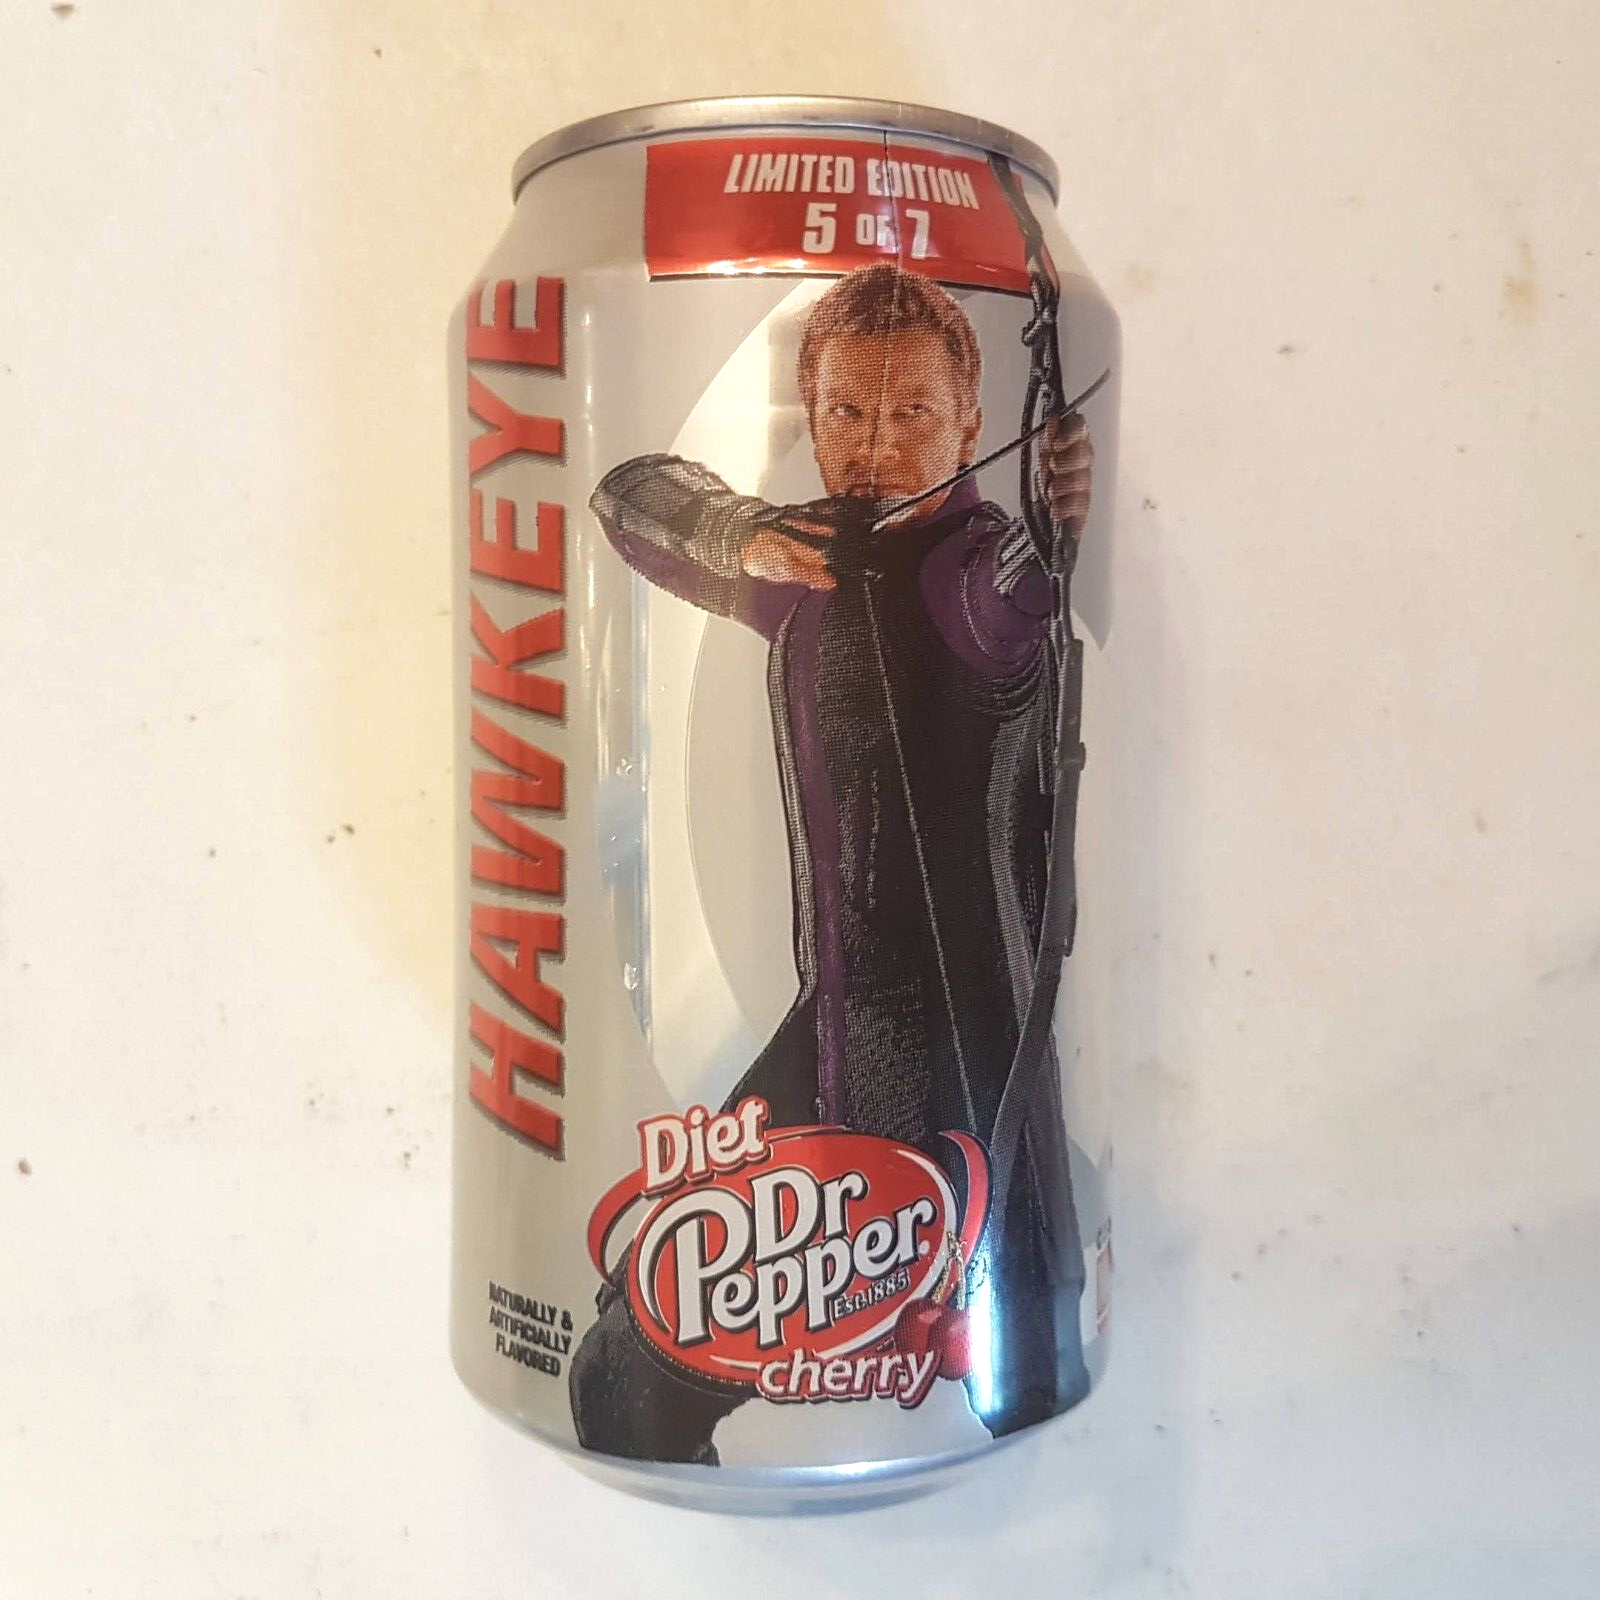 Avengers Age of Ultron Hawkeye Empty Can 2015 Dr Pepper Cherry Jeremy Renner 5/7 - $7.85